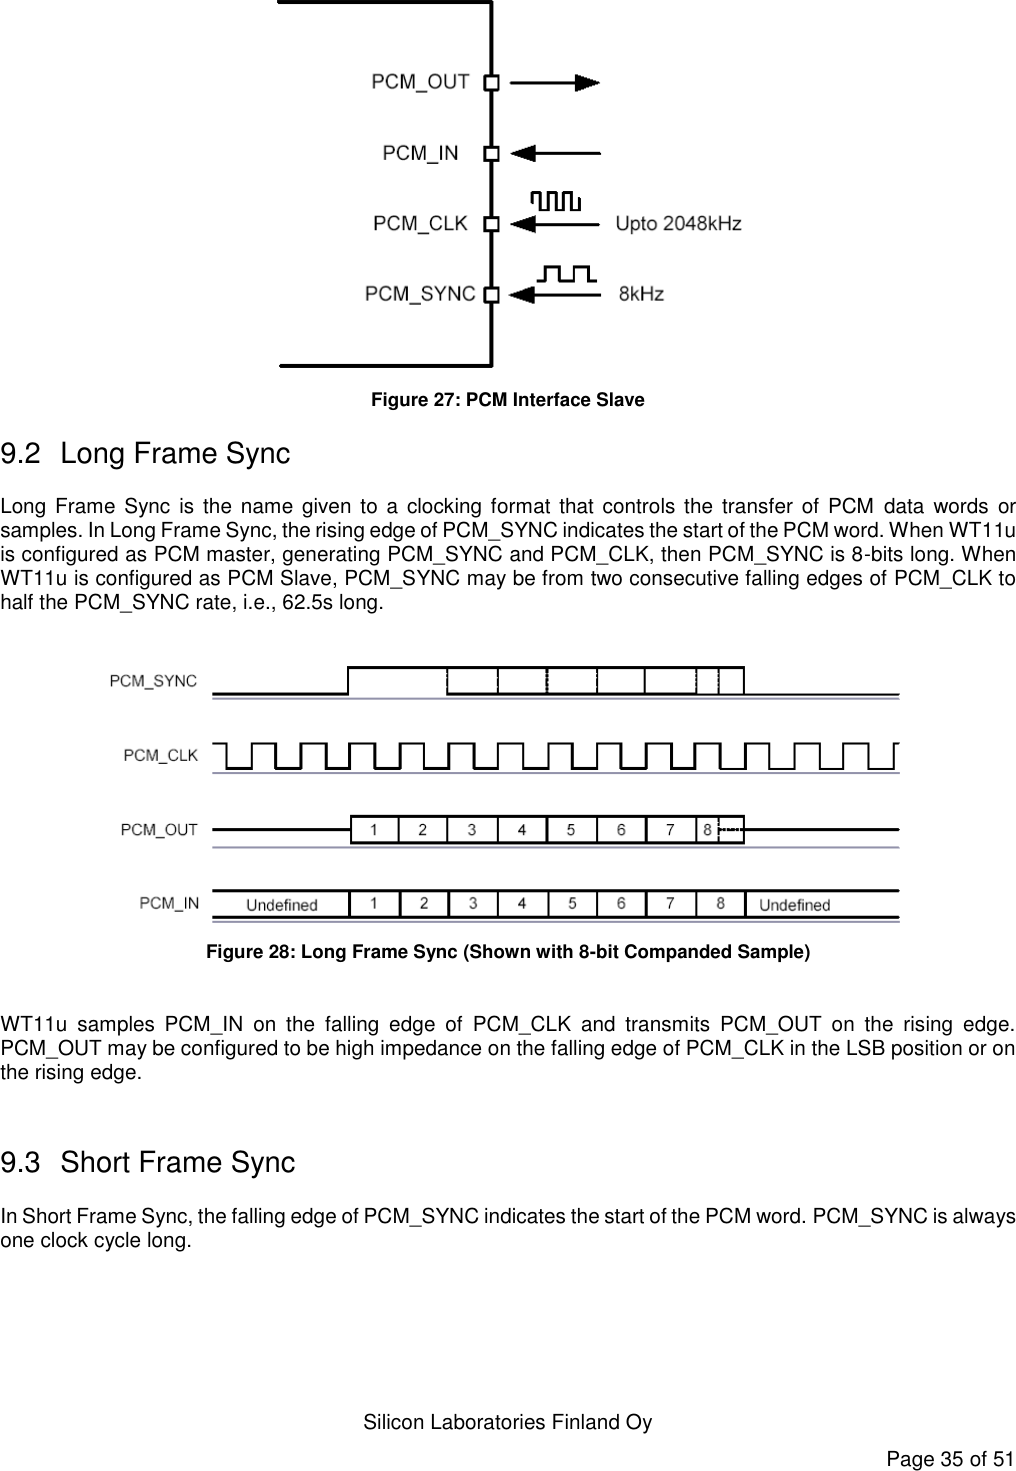   Silicon Laboratories Finland Oy Page 35 of 51  Figure 27: PCM Interface Slave 9.2  Long Frame Sync Long Frame Sync is  the  name given to a clocking format that controls  the transfer of  PCM  data  words  or samples. In Long Frame Sync, the rising edge of PCM_SYNC indicates the start of the PCM word. When WT11u is configured as PCM master, generating PCM_SYNC and PCM_CLK, then PCM_SYNC is 8-bits long. When WT11u is configured as PCM Slave, PCM_SYNC may be from two consecutive falling edges of PCM_CLK to half the PCM_SYNC rate, i.e., 62.5s long.   Figure 28: Long Frame Sync (Shown with 8-bit Companded Sample)  WT11u  samples  PCM_IN  on  the  falling  edge  of  PCM_CLK  and  transmits  PCM_OUT  on  the  rising  edge. PCM_OUT may be configured to be high impedance on the falling edge of PCM_CLK in the LSB position or on the rising edge.  9.3  Short Frame Sync In Short Frame Sync, the falling edge of PCM_SYNC indicates the start of the PCM word. PCM_SYNC is always one clock cycle long. 